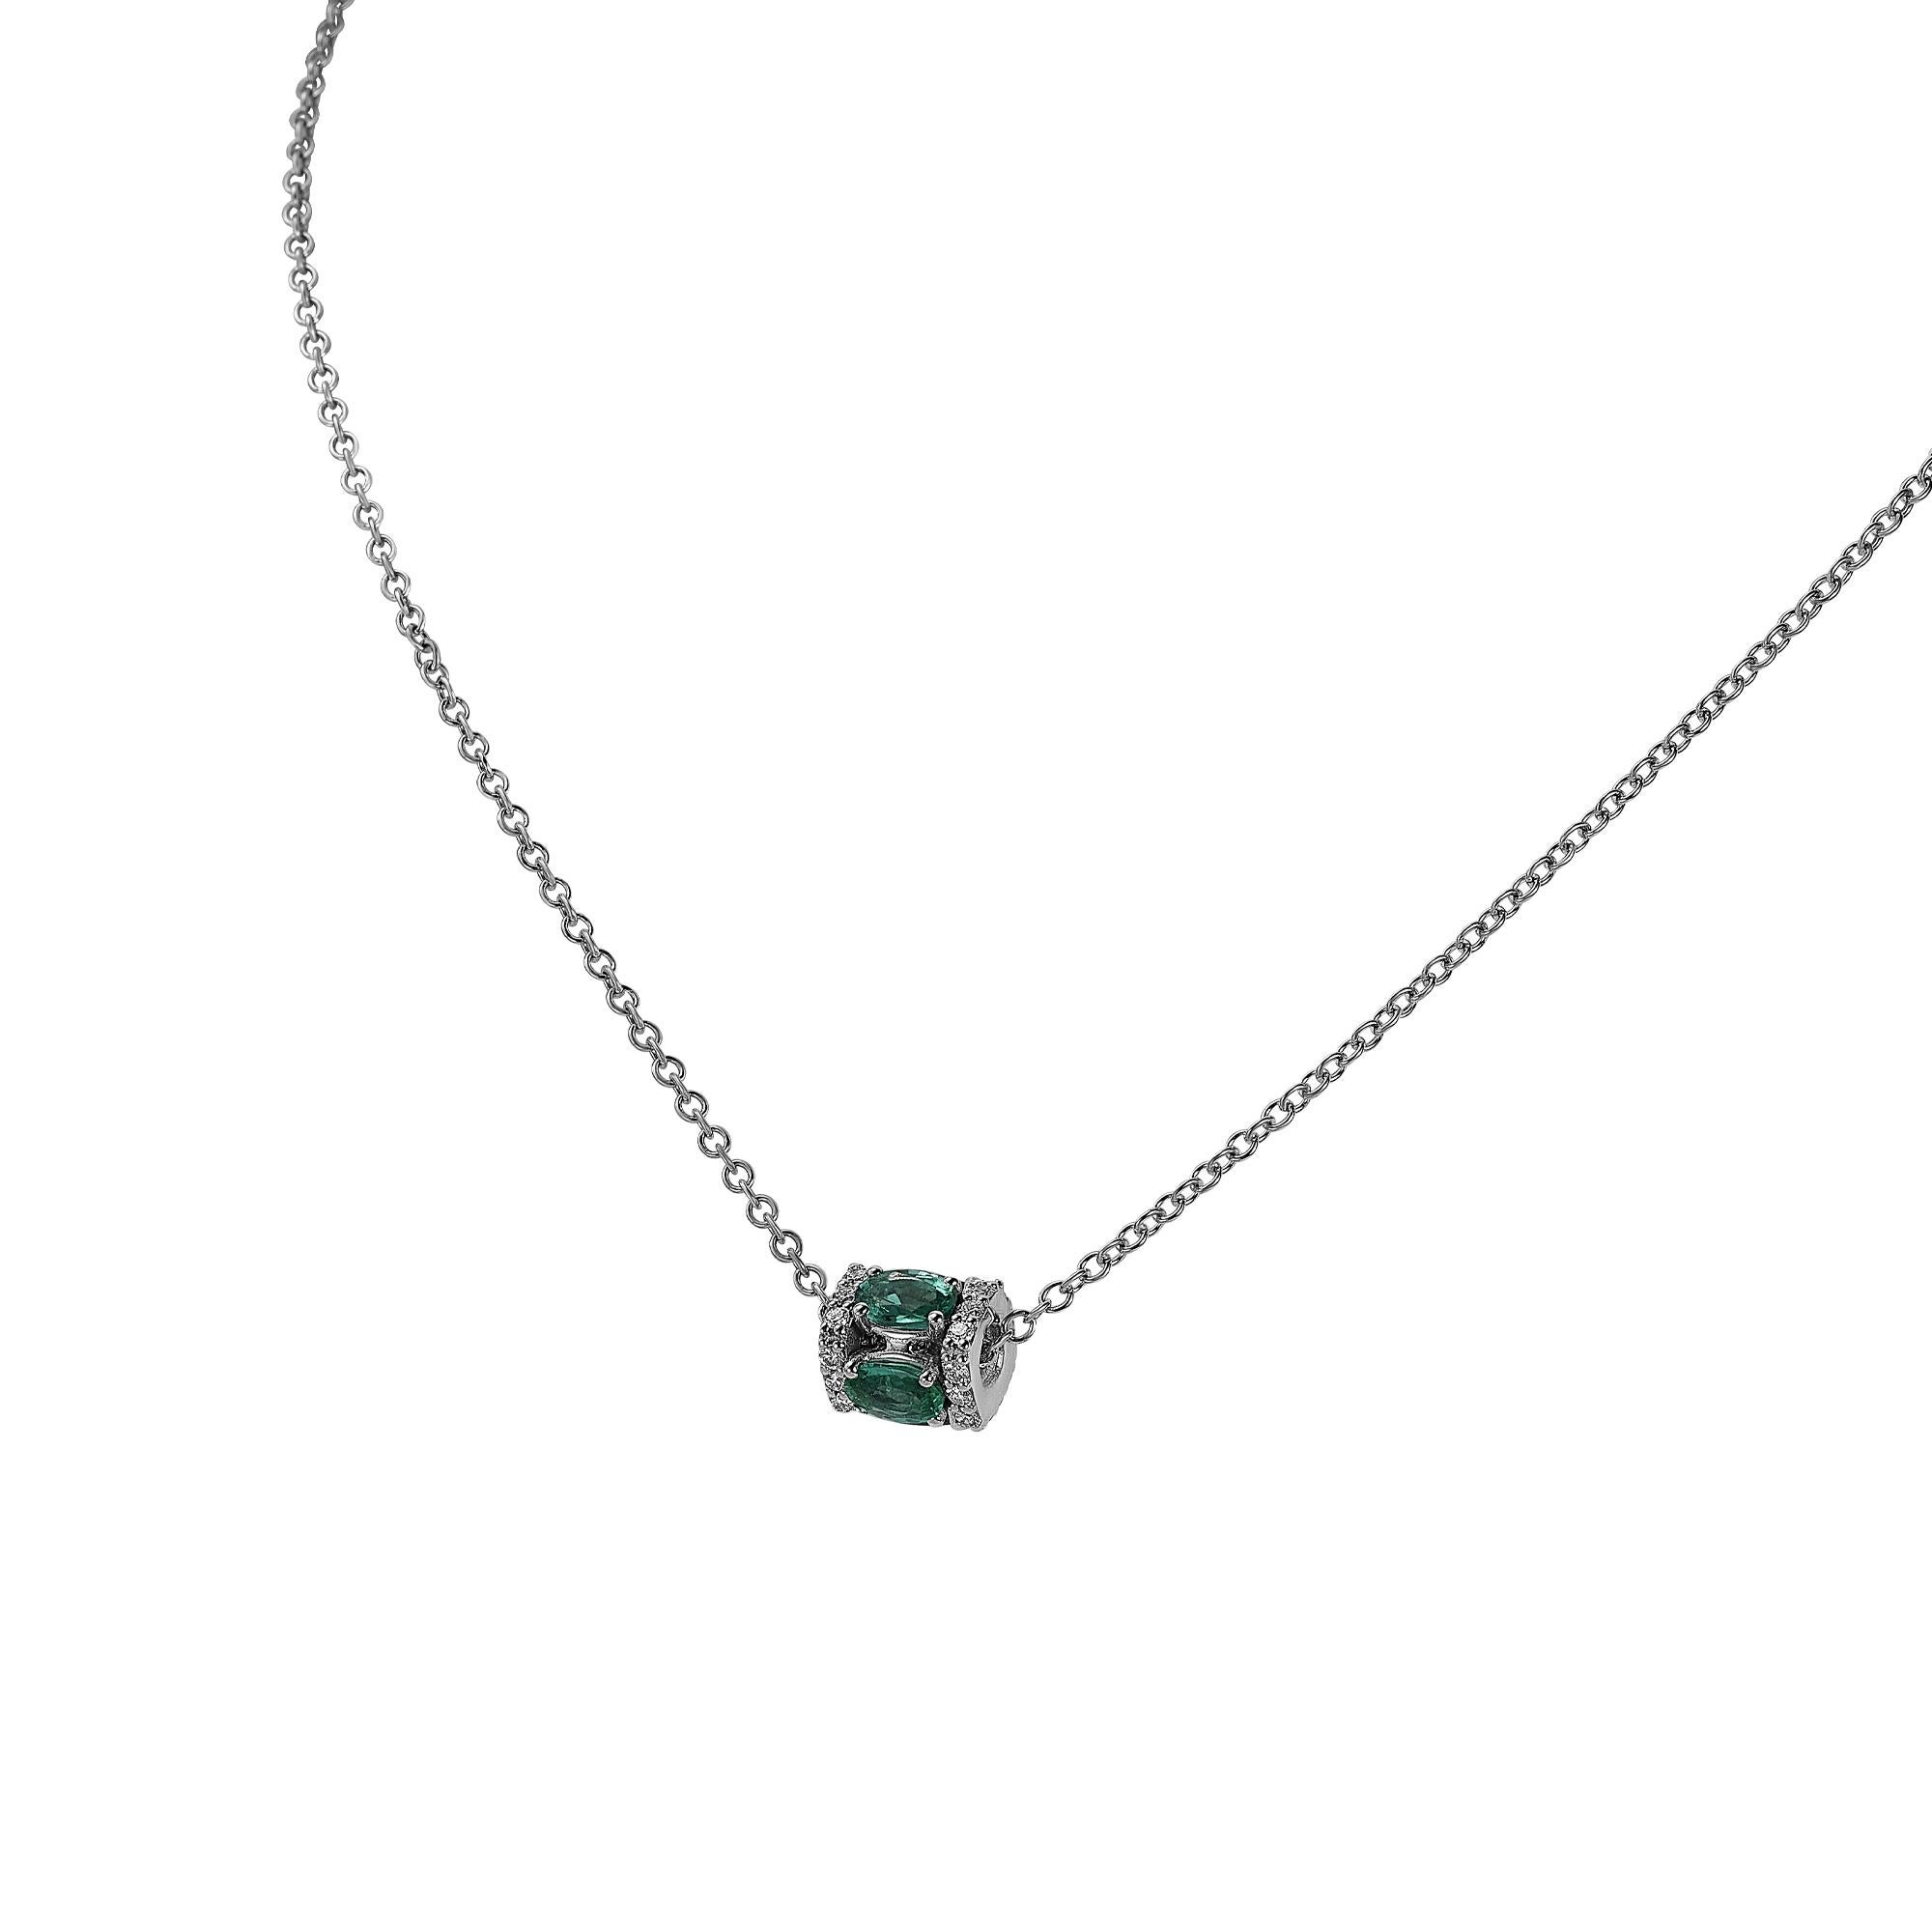 18K white gold, white diamond (approx. 0.38 carats), and emerald (approx. 1.73 carats) pendant 